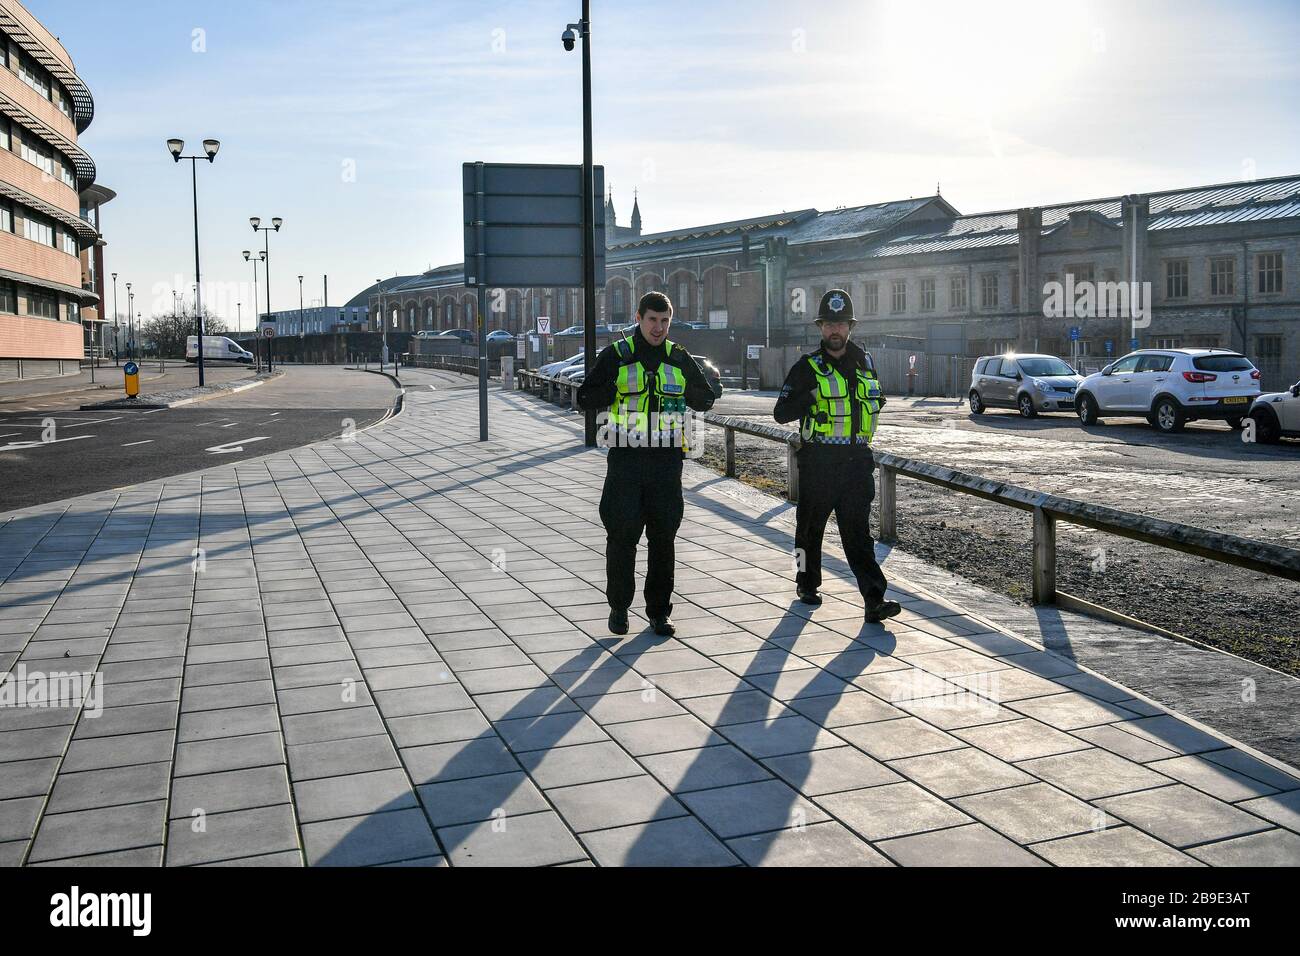 British Transport Police patrol the perimeter of Bristol Temple Meads train station, which is empty of rush-hour commuters and travelers at 8am the day after Prime Minister Boris Johnson put the UK in lockdown to help curb the spread of the coronavirus. Stock Photo